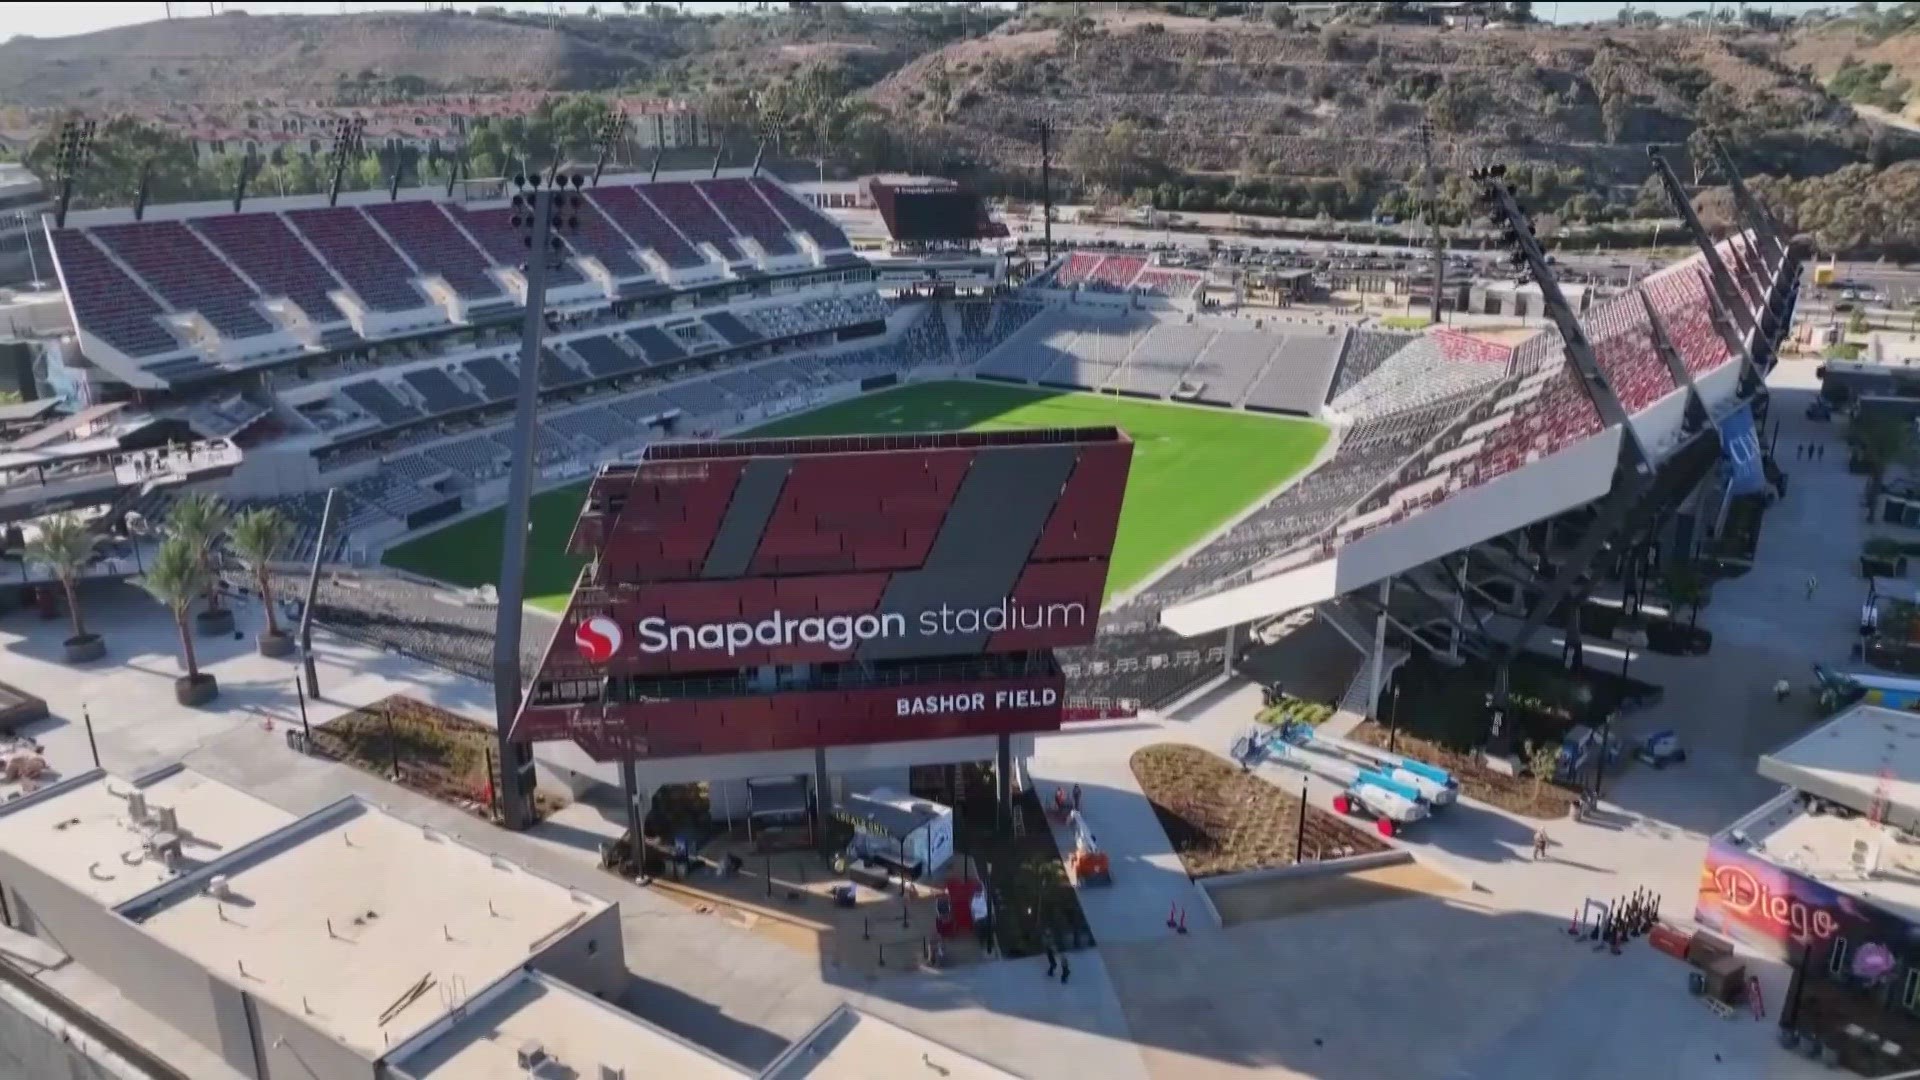 The announcement of the next expansion MLS team was made from San Diego's Snapdragon Stadium, which will host the team beginning in 2025.